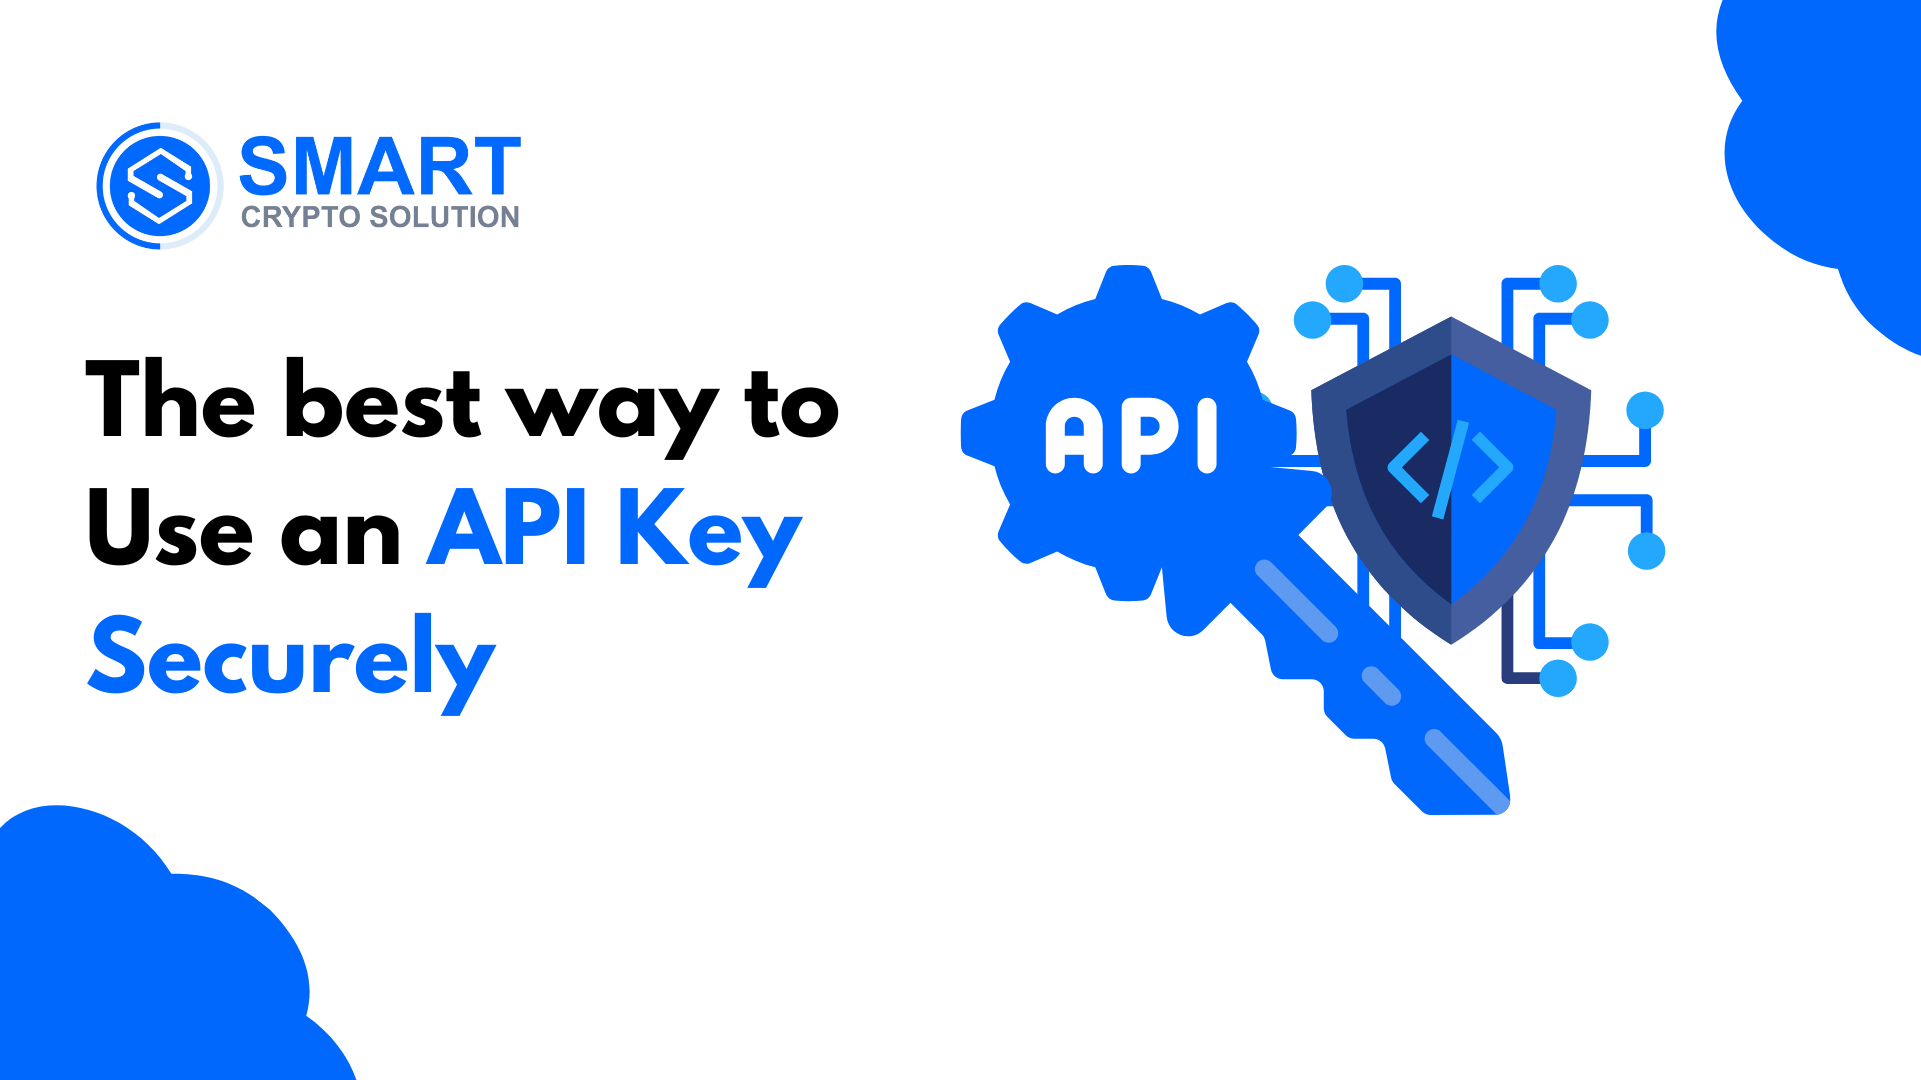 The best way to Use an API Key Securely